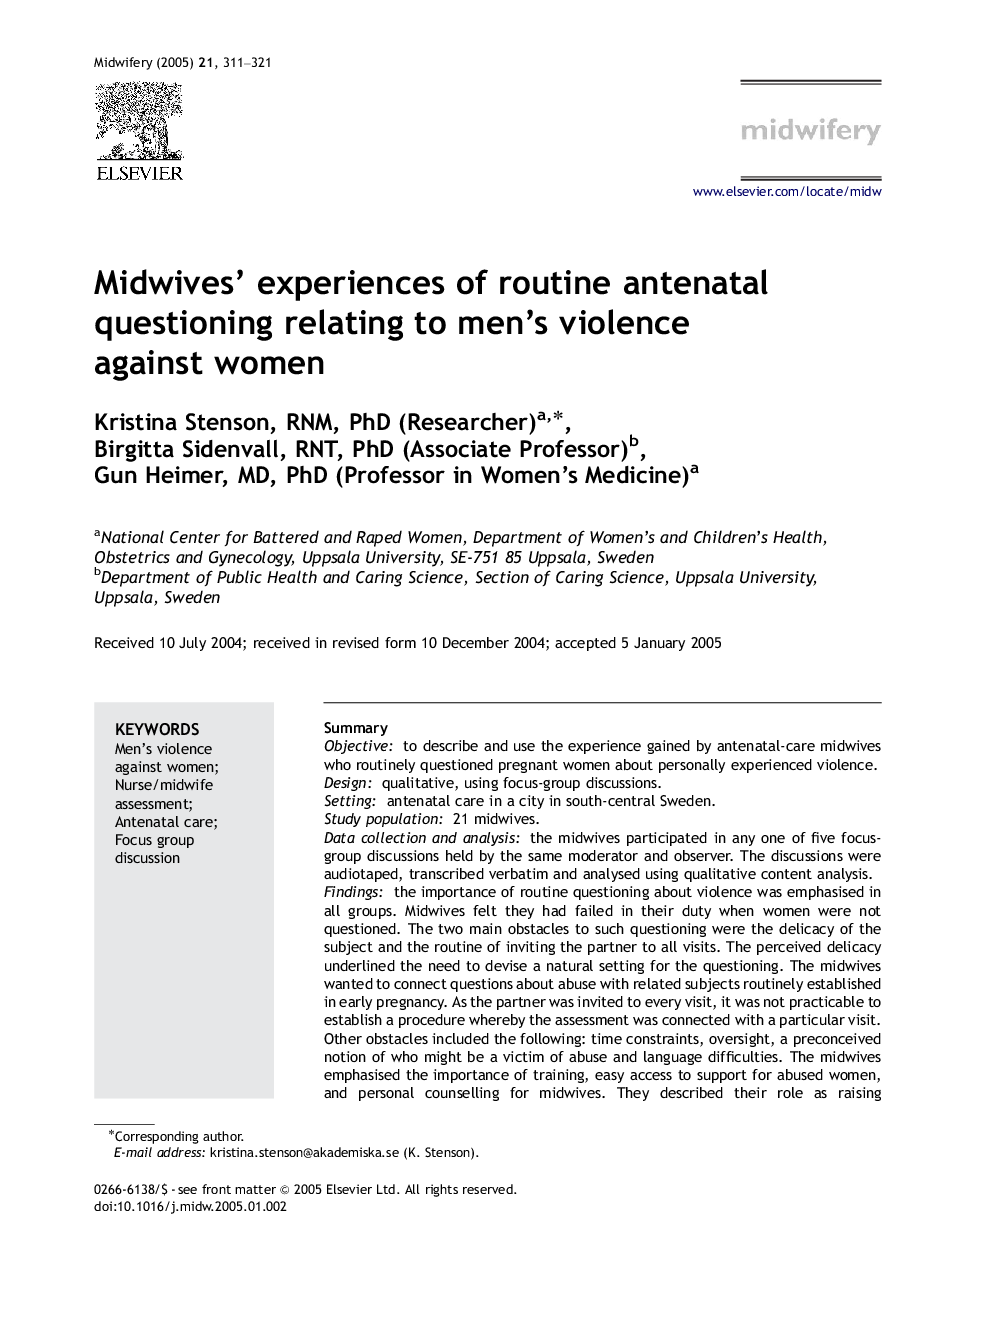 Midwives' experiences of routine antenatal questioning relating to men's violence against women